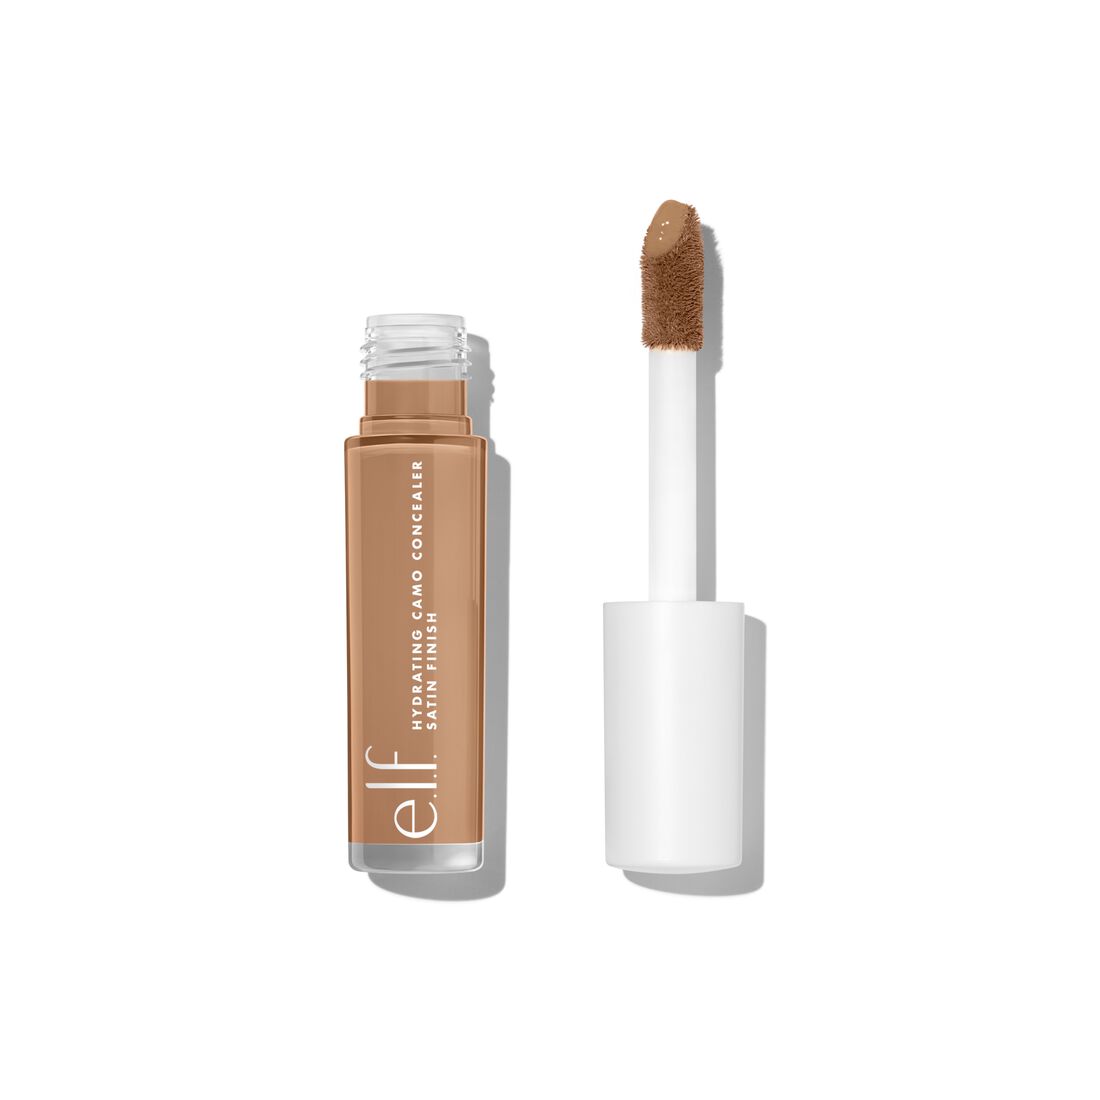 Hydrating Camo Concealer, Tan Walnut - tan with cool-neutral undertones